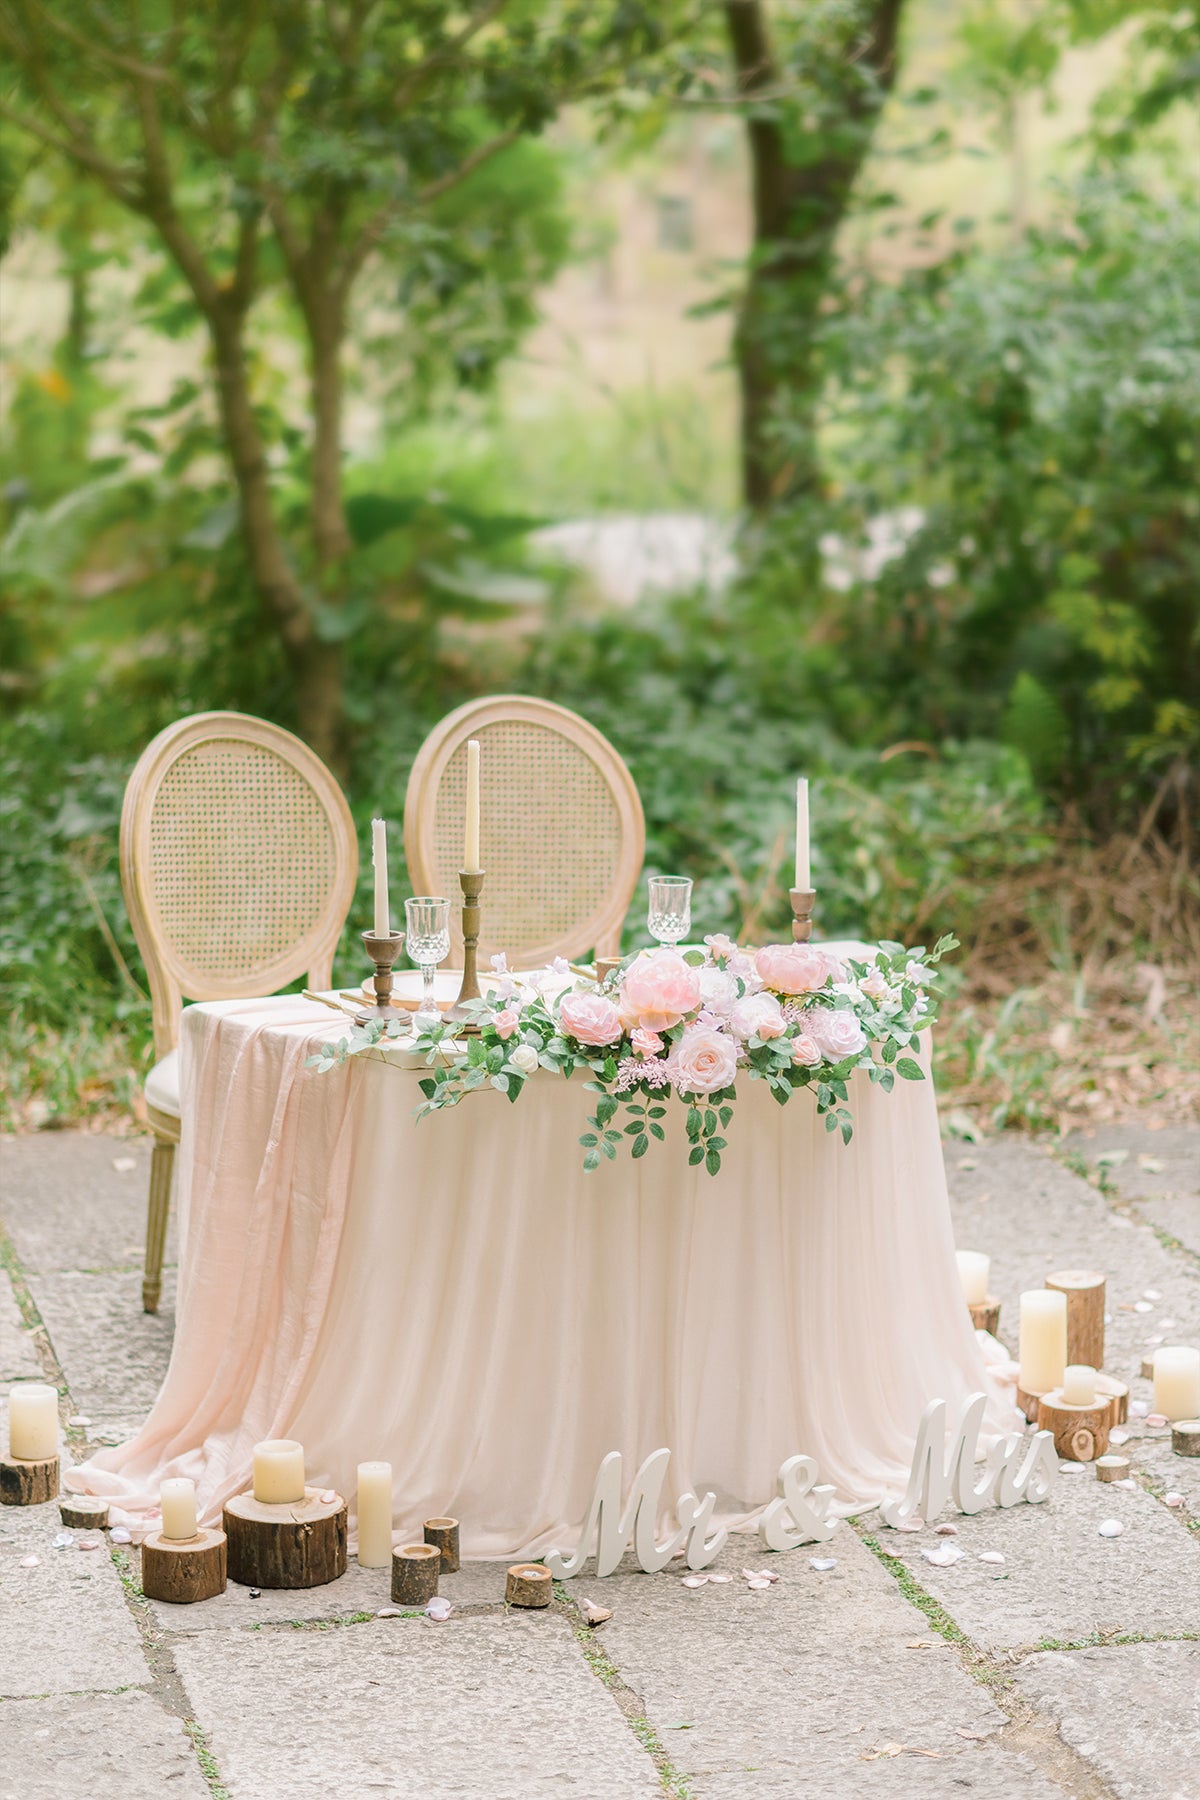 Head Table Floral Swags in Blush & Cream | Limit-time